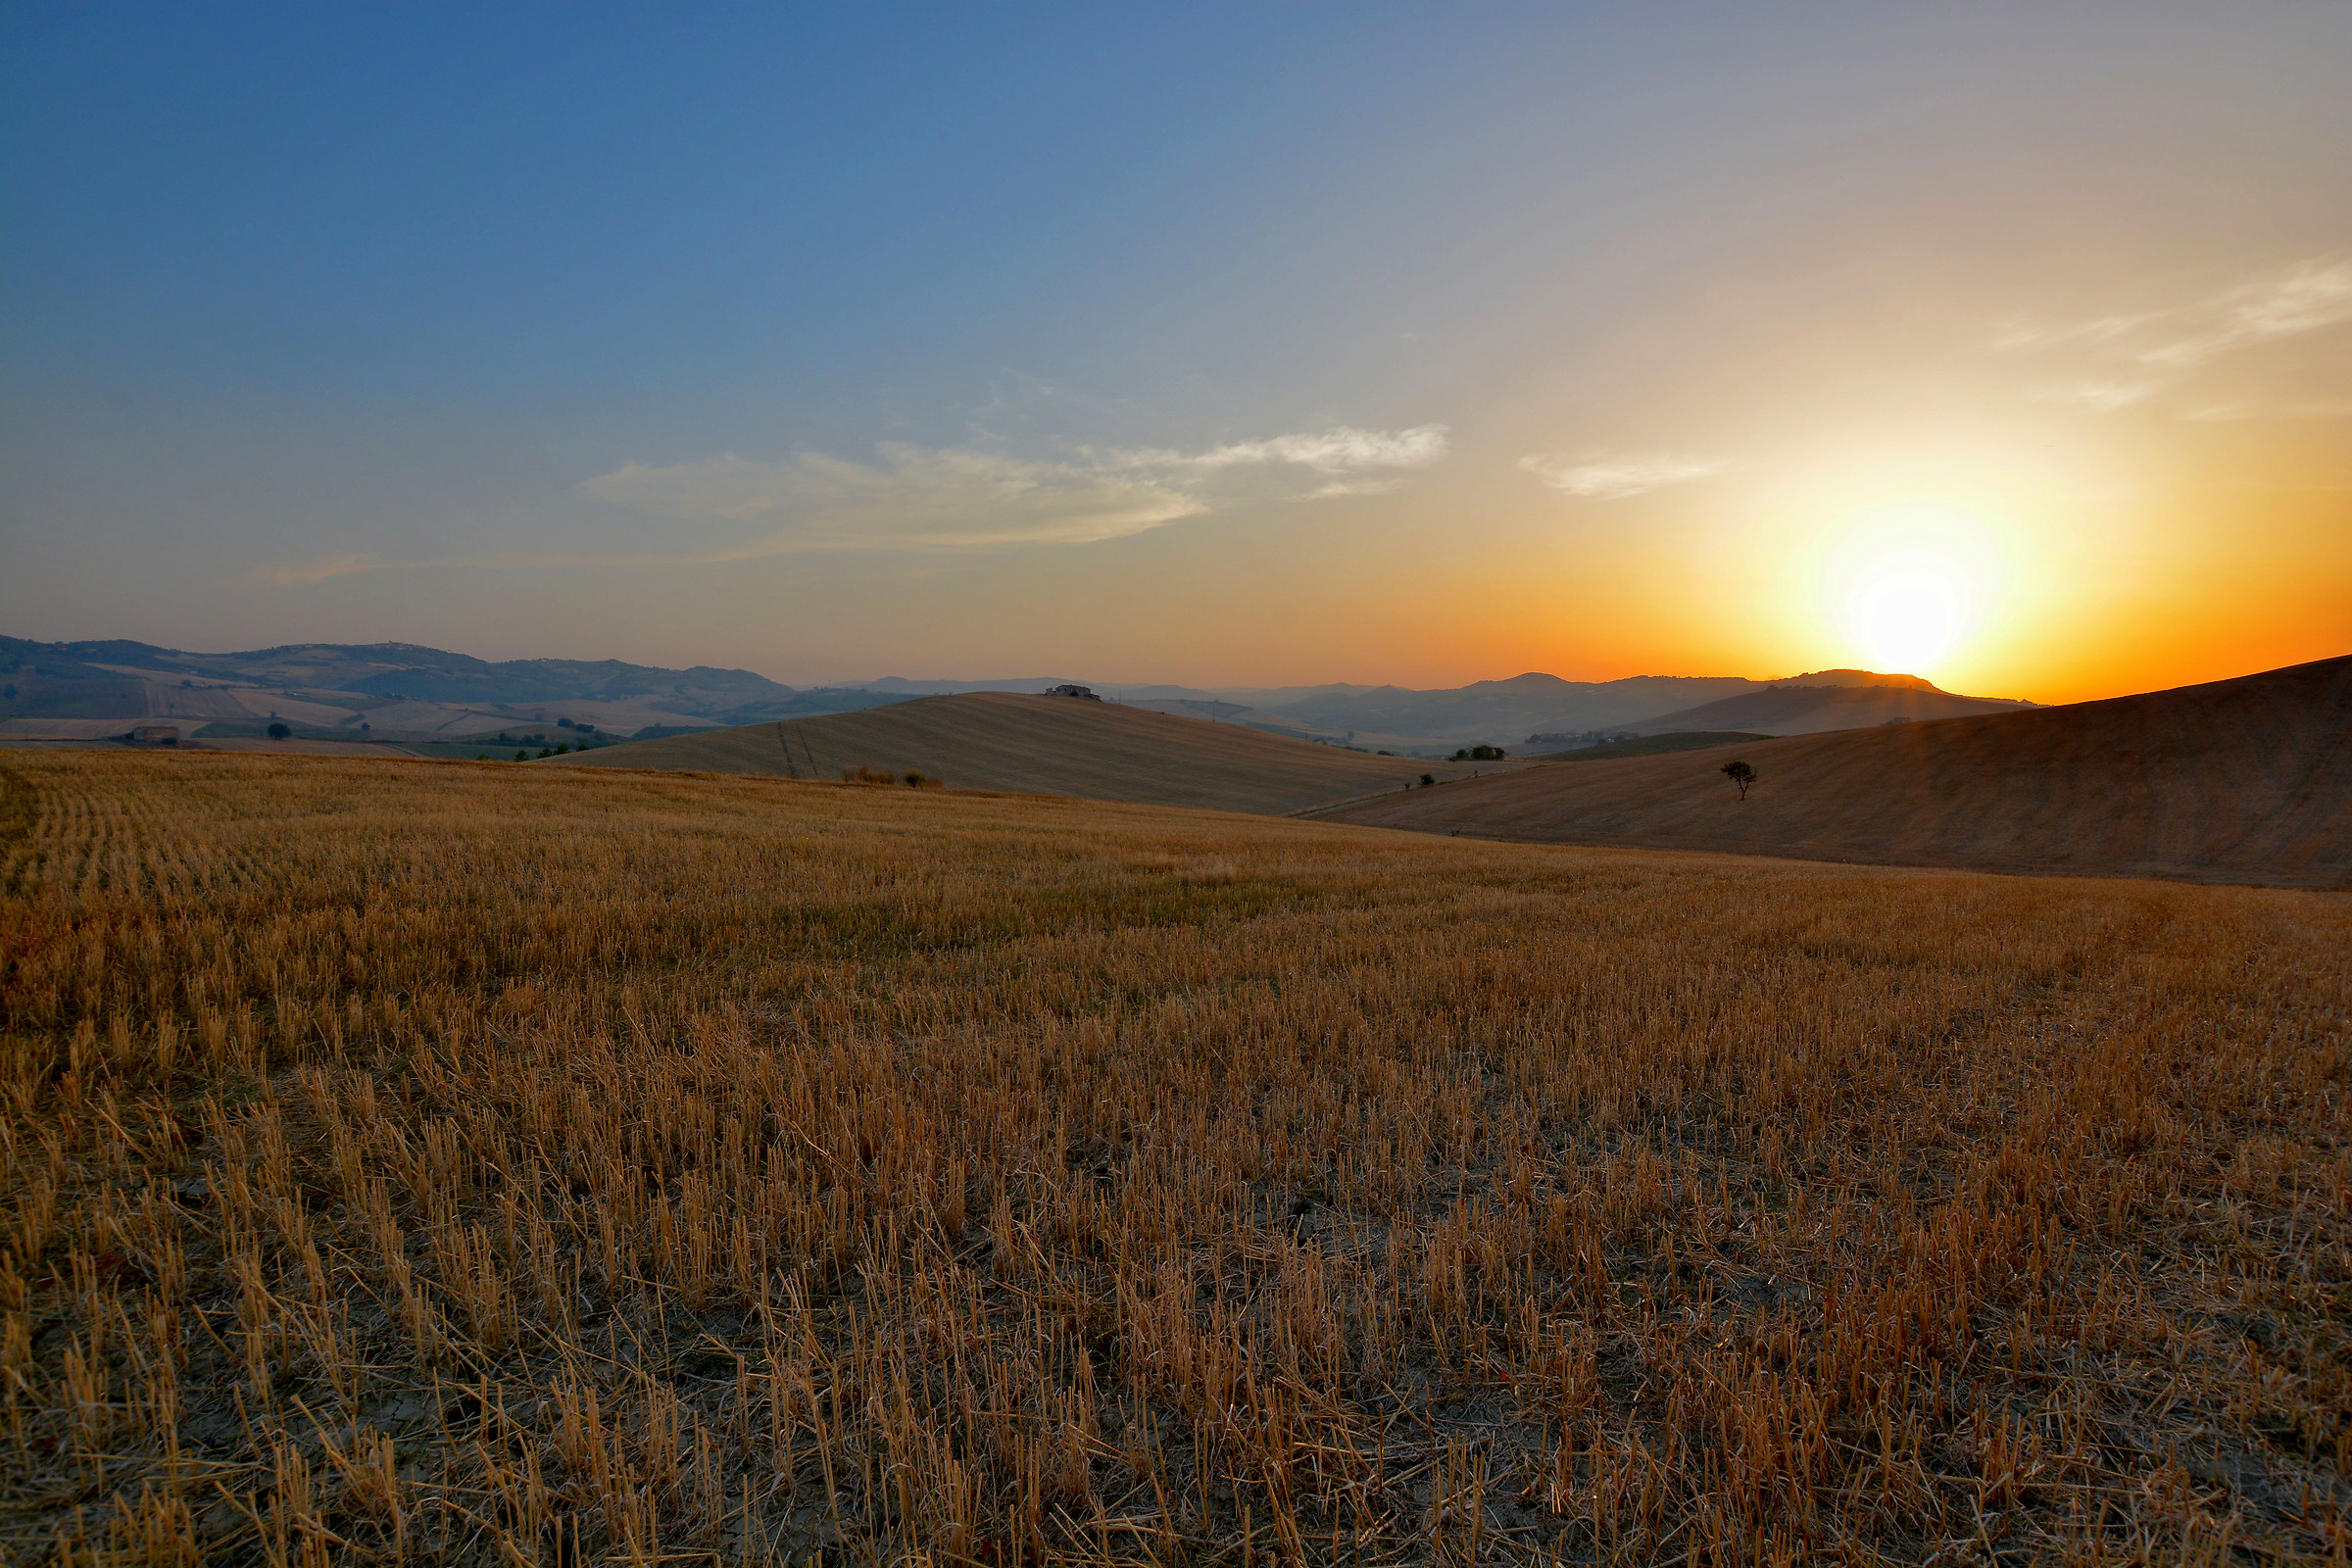 Wheat and Sunset...